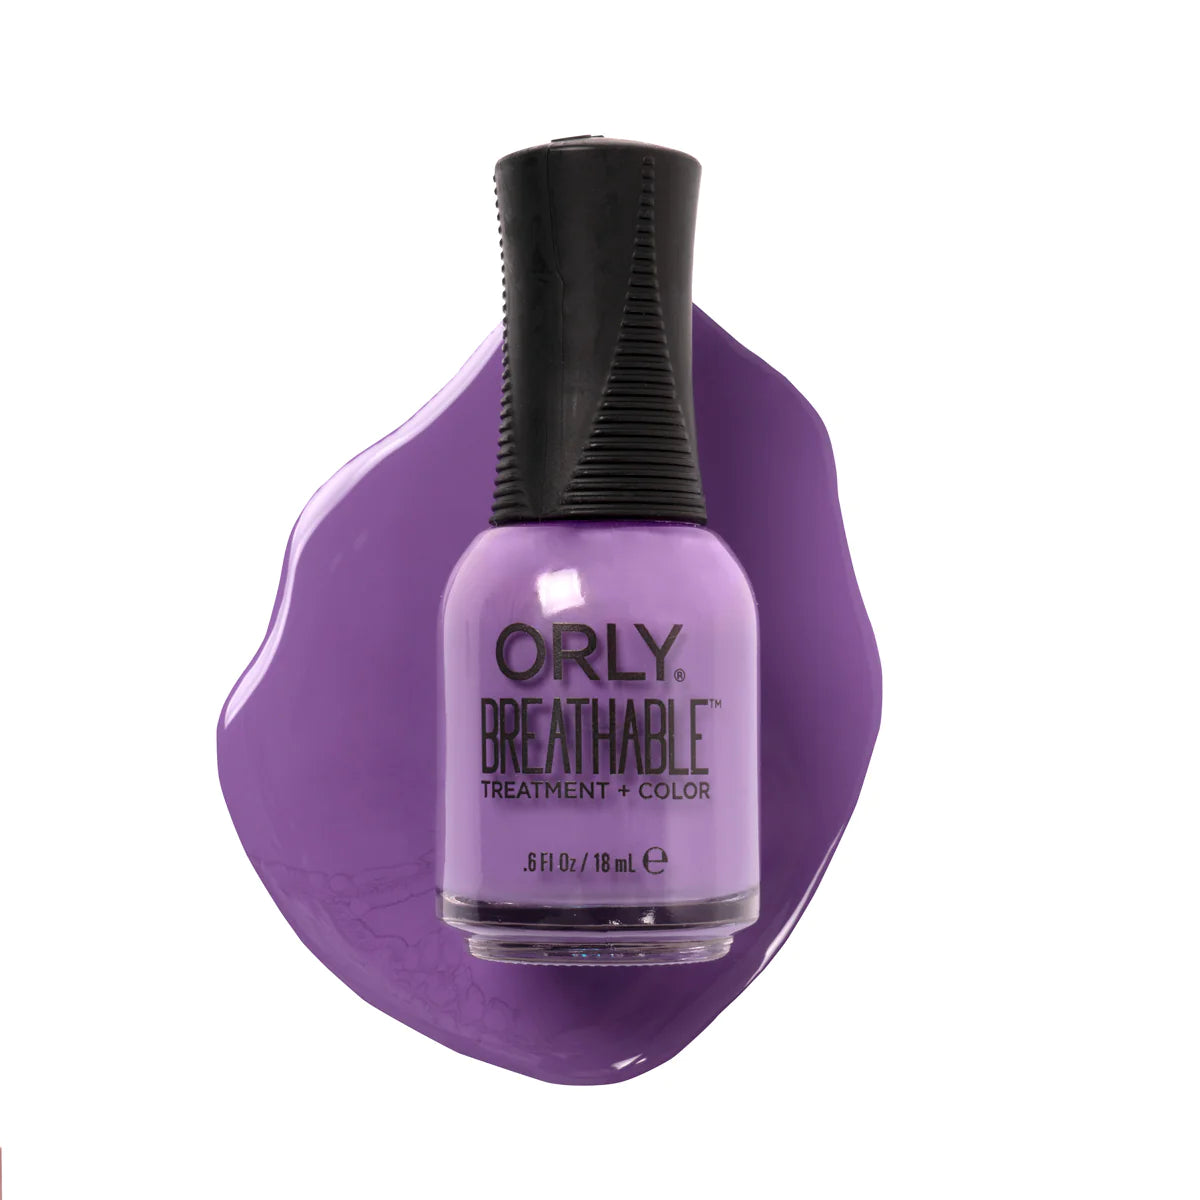 ORLY Breathable Feeling Free